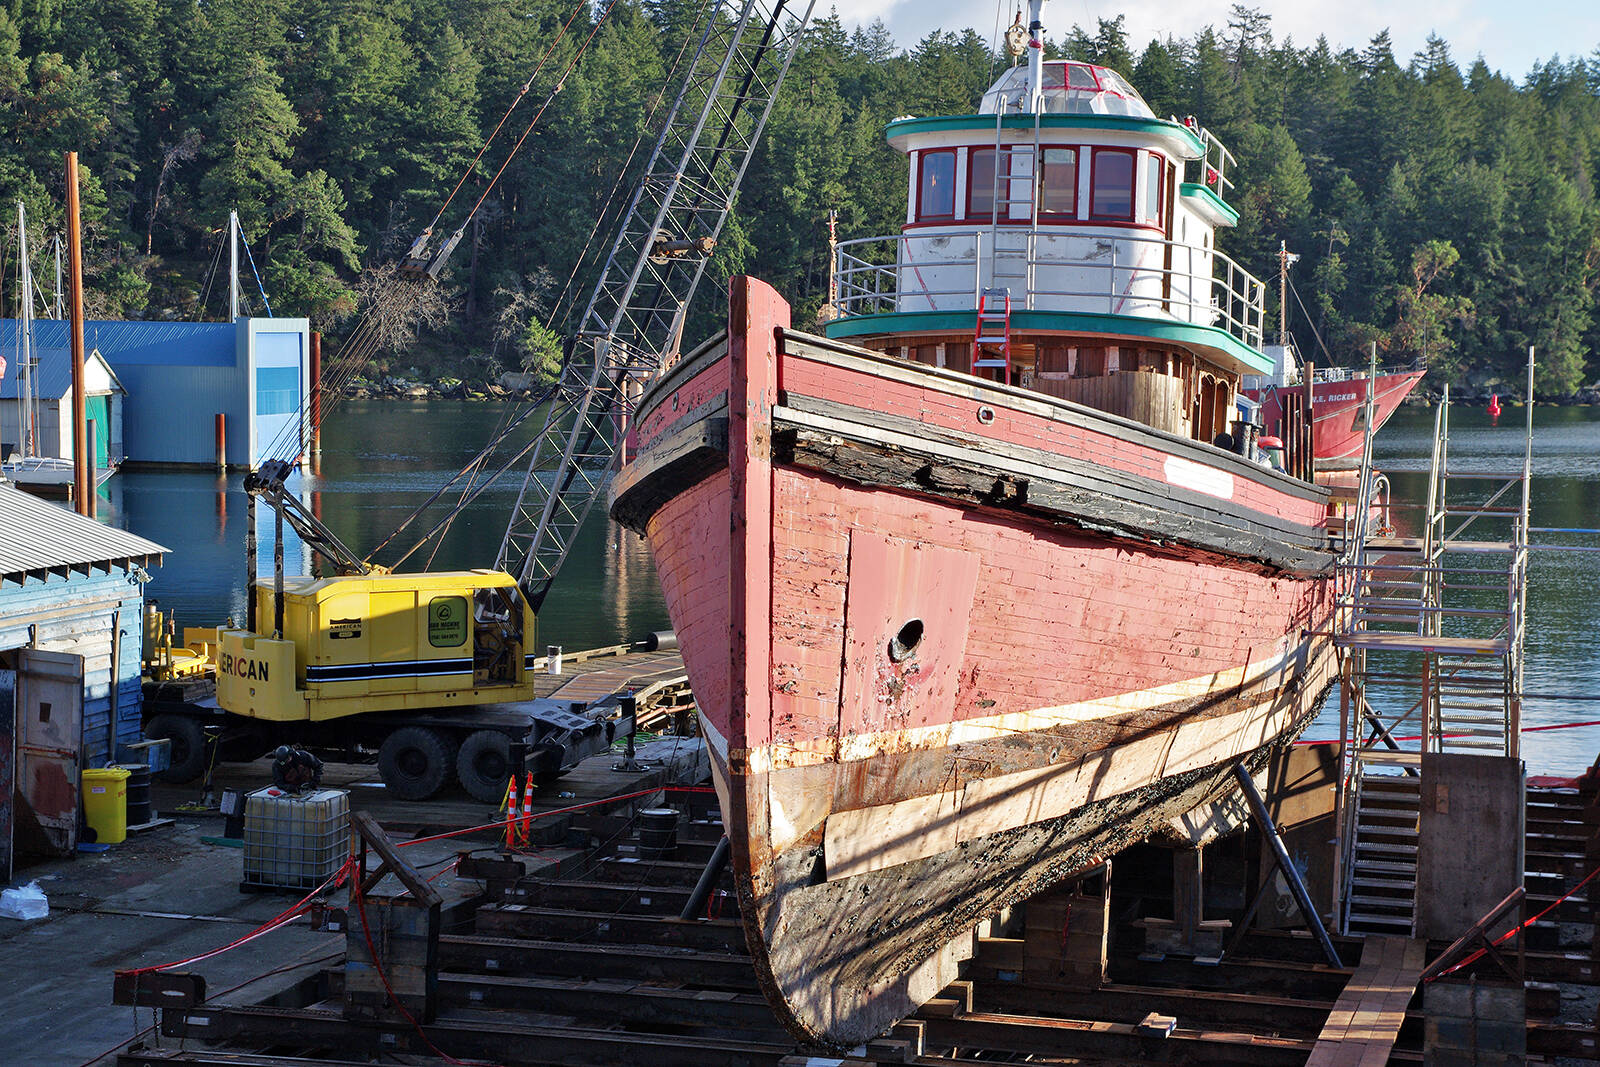 MV Sea Lion, which was built in 1905 and was B.C.'s oldest wooden tugboat, is being scrapped at a shipyard in Nanaimo. (Chris Bush/News Bulletin)